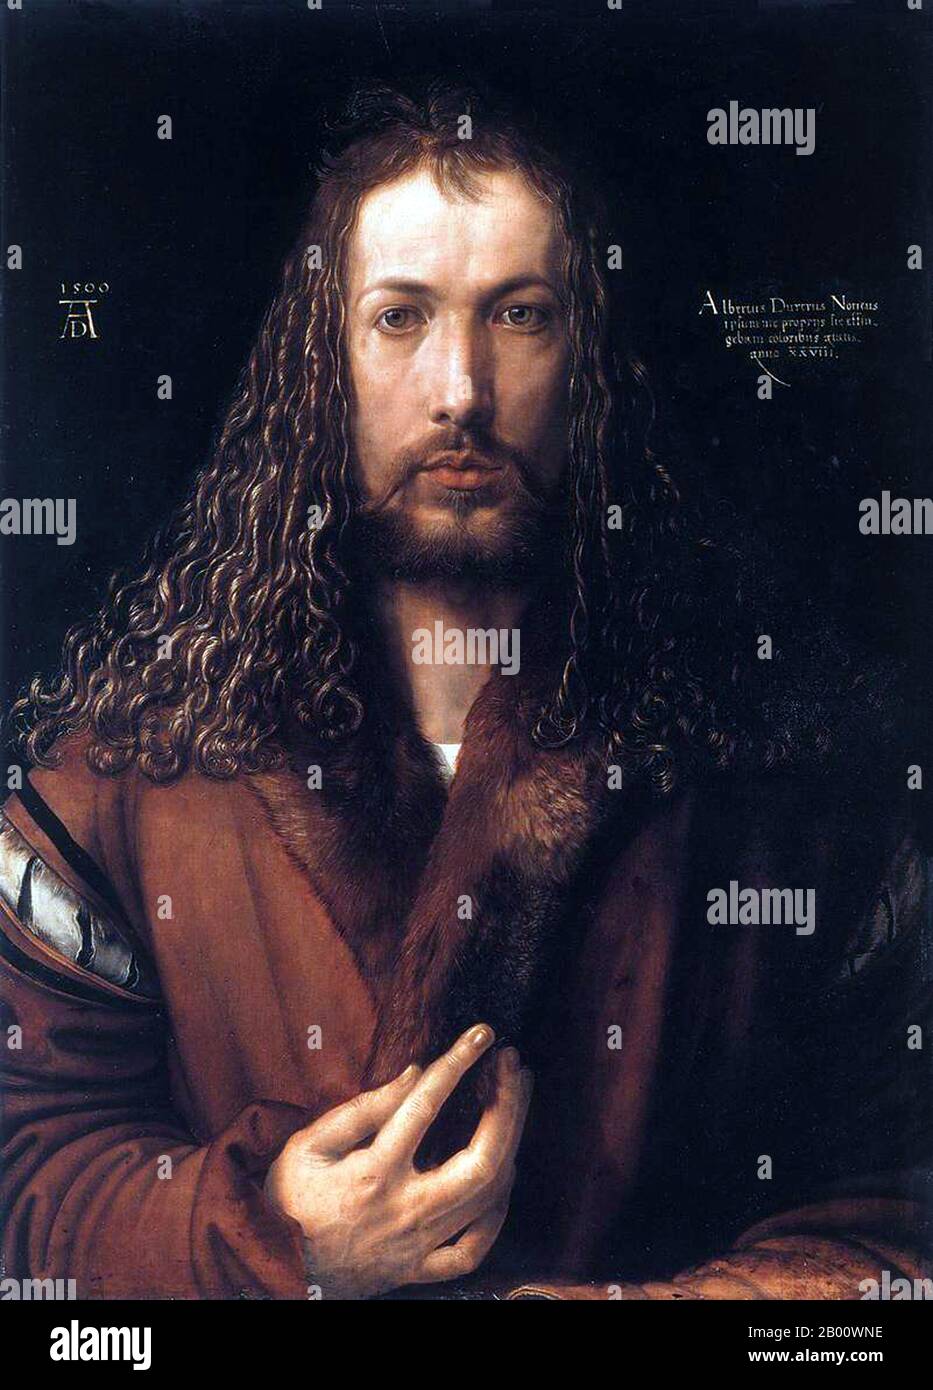 Germany: 'Self-Portrait in a Fur-Collared Robe'. Oil on lime panel painting by Albrecht Dürer (1471-1528), 1500.  Albrecht Dürer (21 May 1471 – 6 April 1528) was a German painter, printmaker and theorist from Nuremberg. His prints established his reputation across Europe when he was still in his twenties, and he has been conventionally regarded as the greatest artist of the Northern Renaissance ever since. Dürer's introduction of classical motifs into Northern art, through his knowledge of Italian artists and German humanists, helped secure his important reputation in the Northern Renaissance. Stock Photo